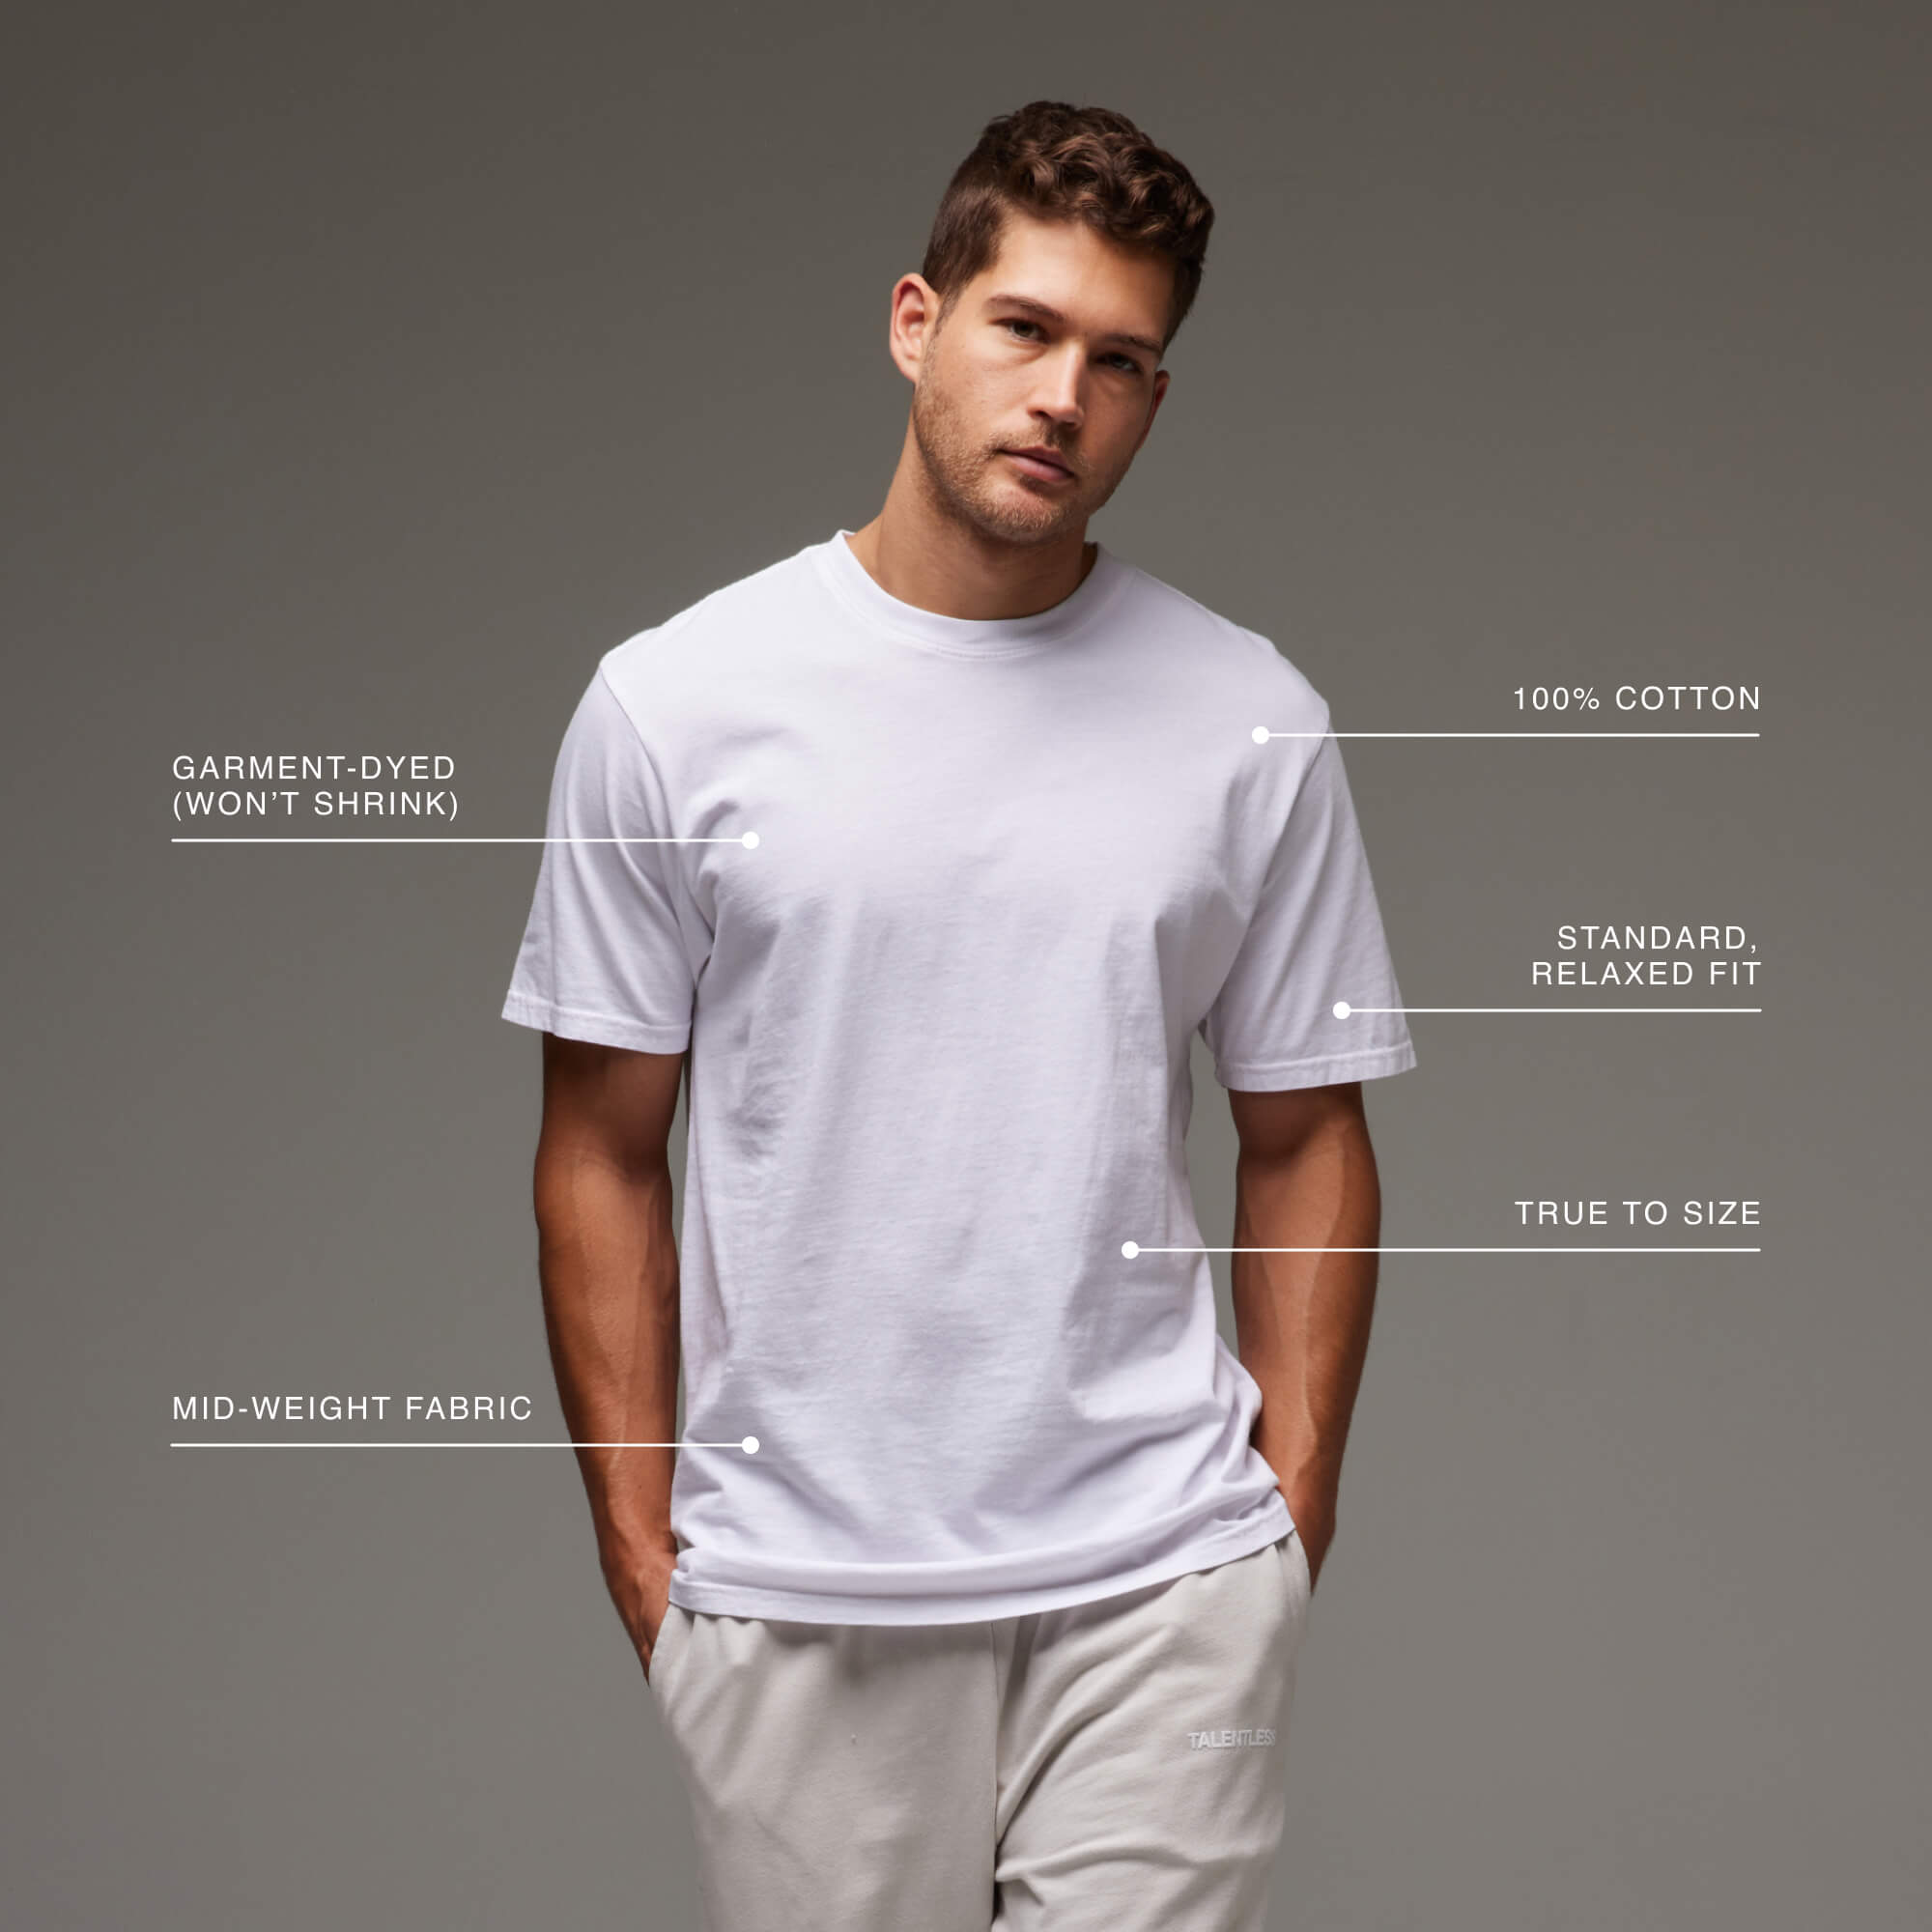 Model wearing the Mens Premium tee, showing the classic relaxed fit.